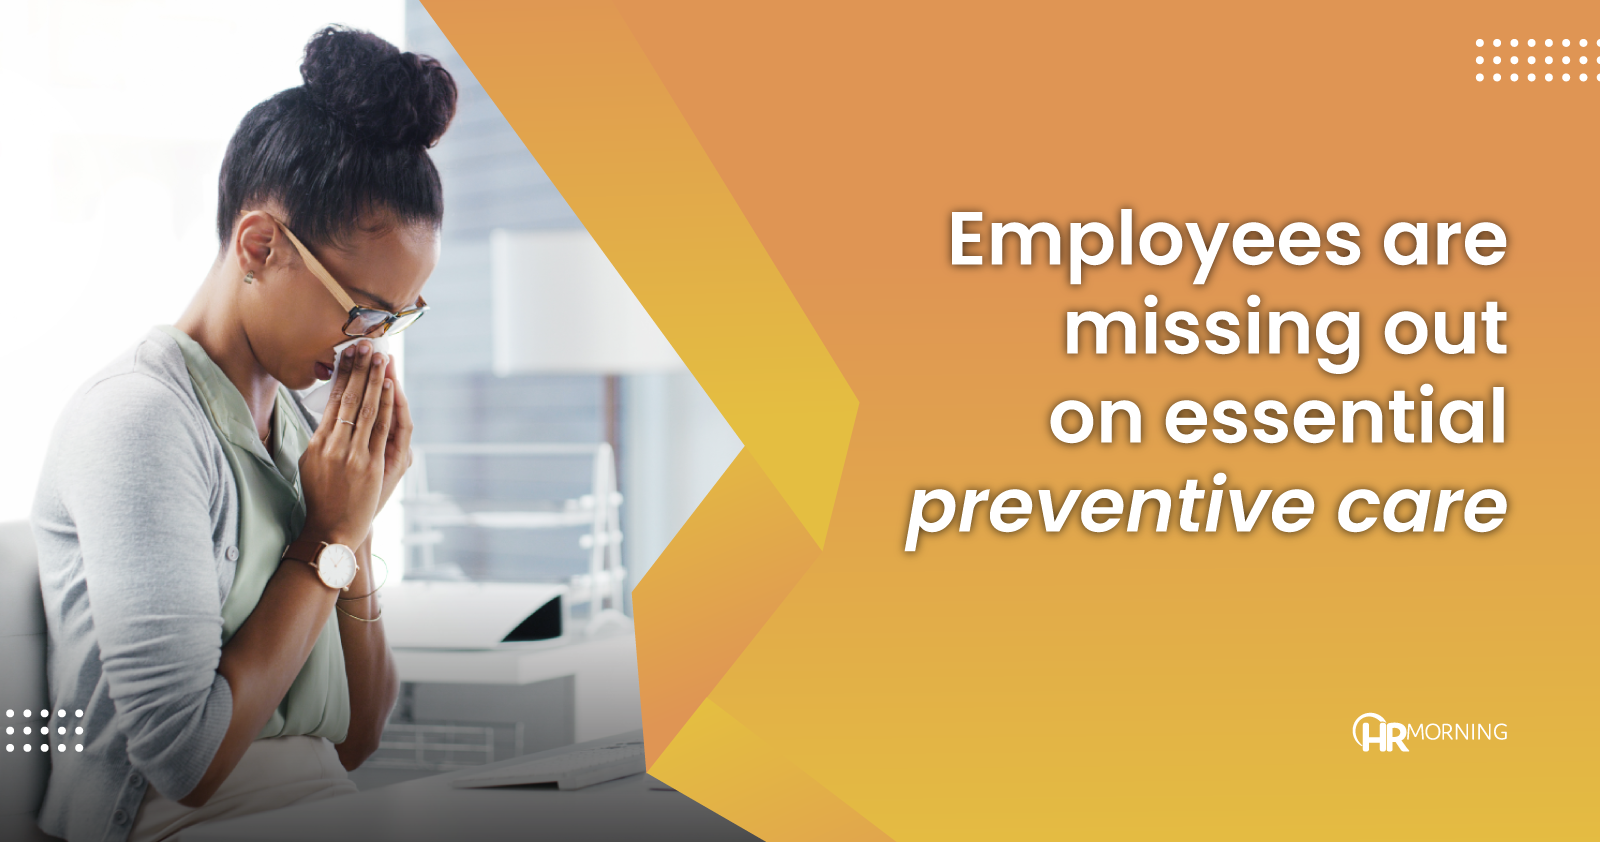 Employees are missing out on essential preventive care